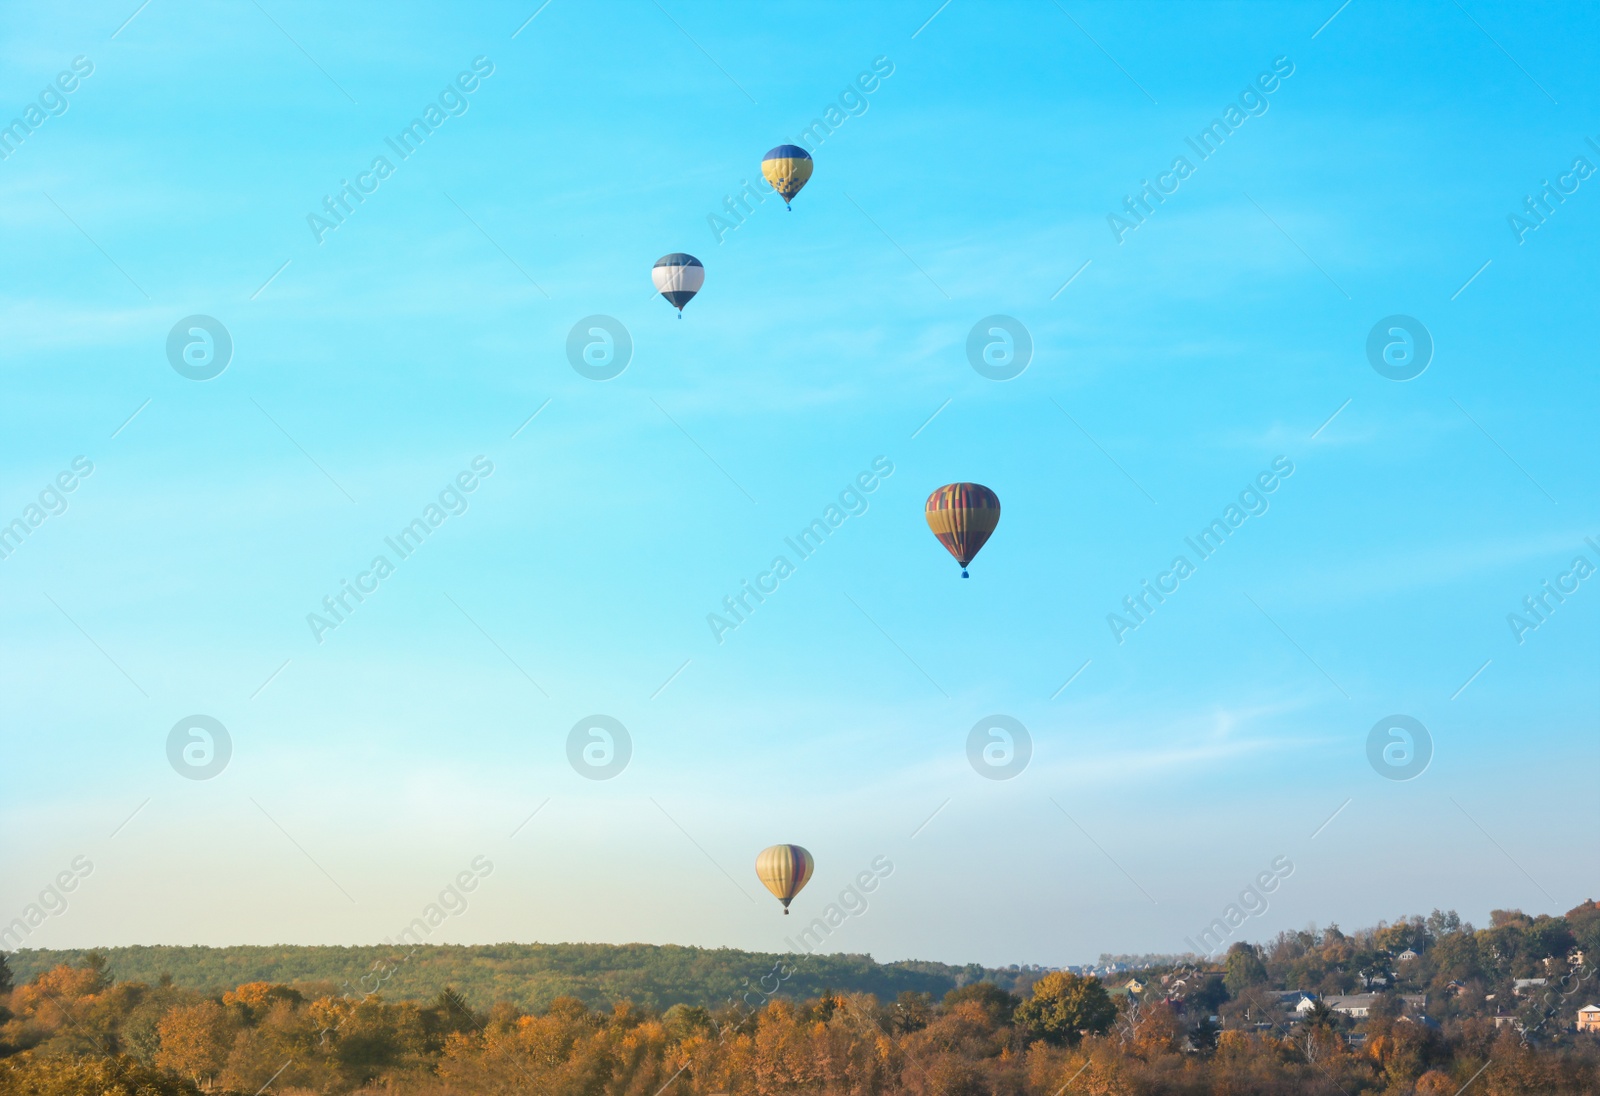 Photo of Colorful hot air balloons flying over countryside